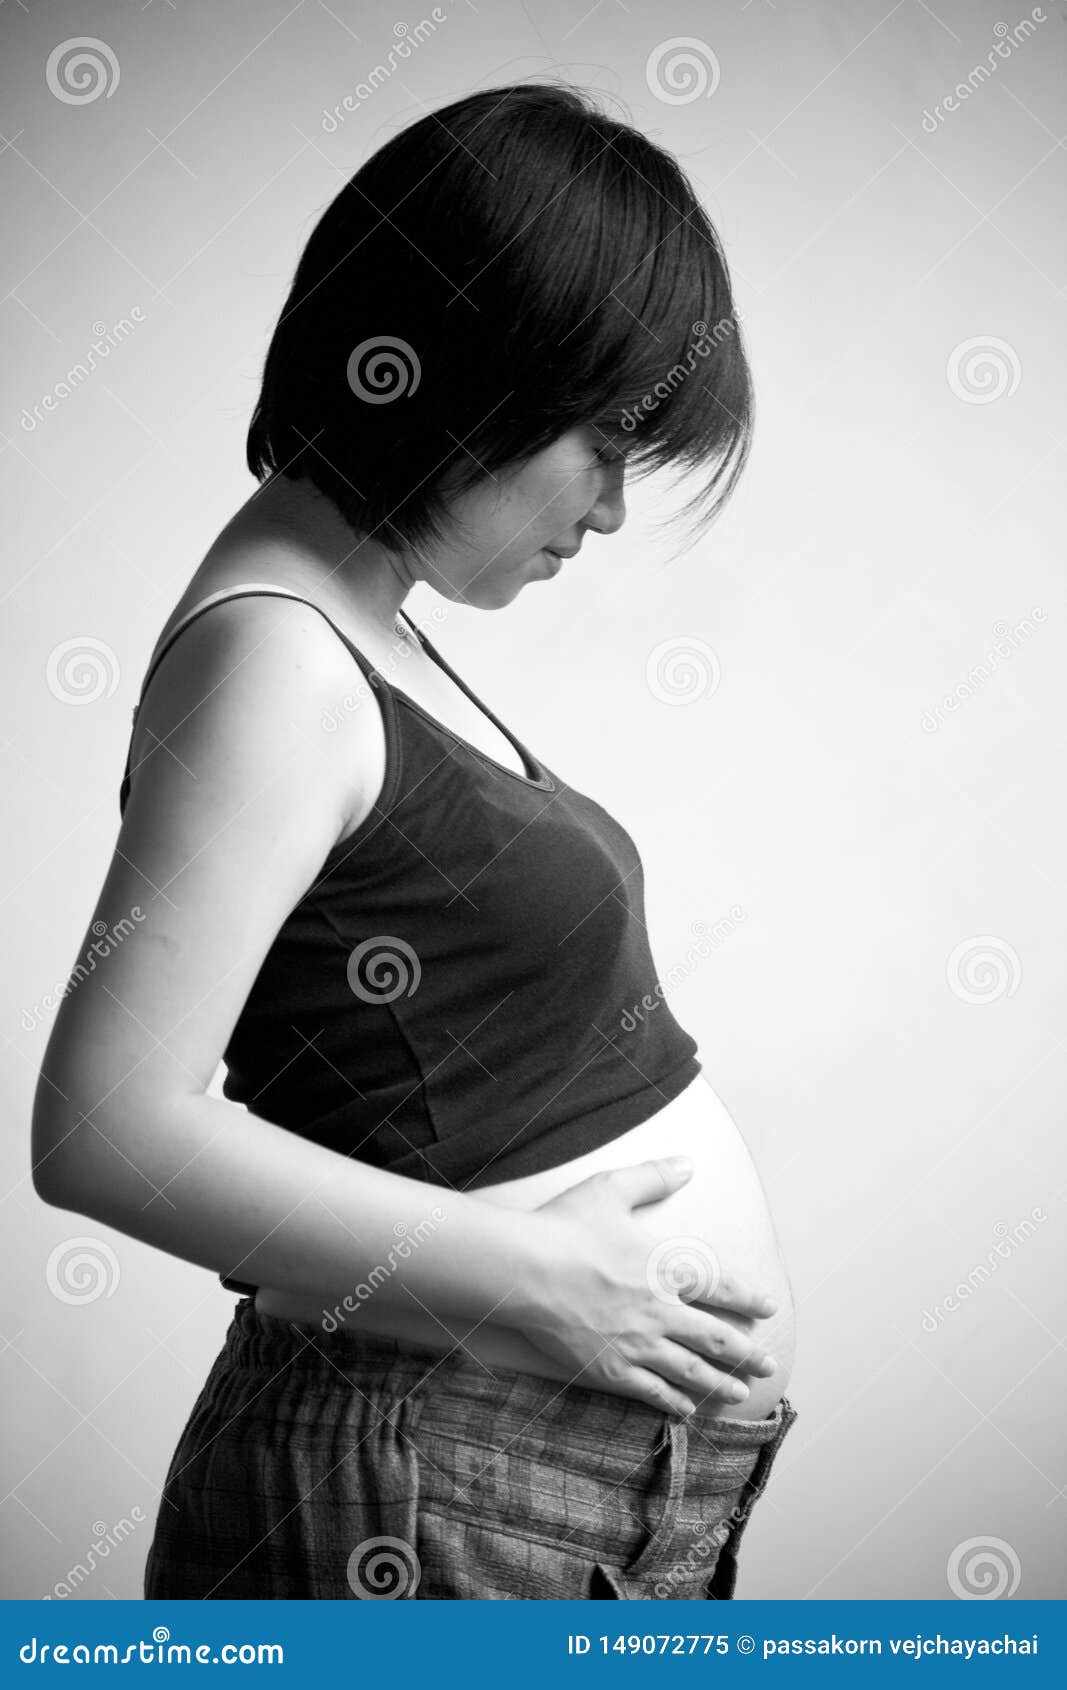 pregnant woman. Portrait of pretty young woman. Future mother, abdomen, adult, anticipation, attractive, baby, background, beautiful, beauty, belly, birth, body, care, childbirth, copyspace, cute, elegant, expectant, expecting, family, fashion, female, girl, hand, happy, health, holding, human, isolated, life, love, lovely, maternity, motherhood, parent, person, positive, pregnancy, pregnant, smile, stomach, studio, touch, tummy, waiting, white